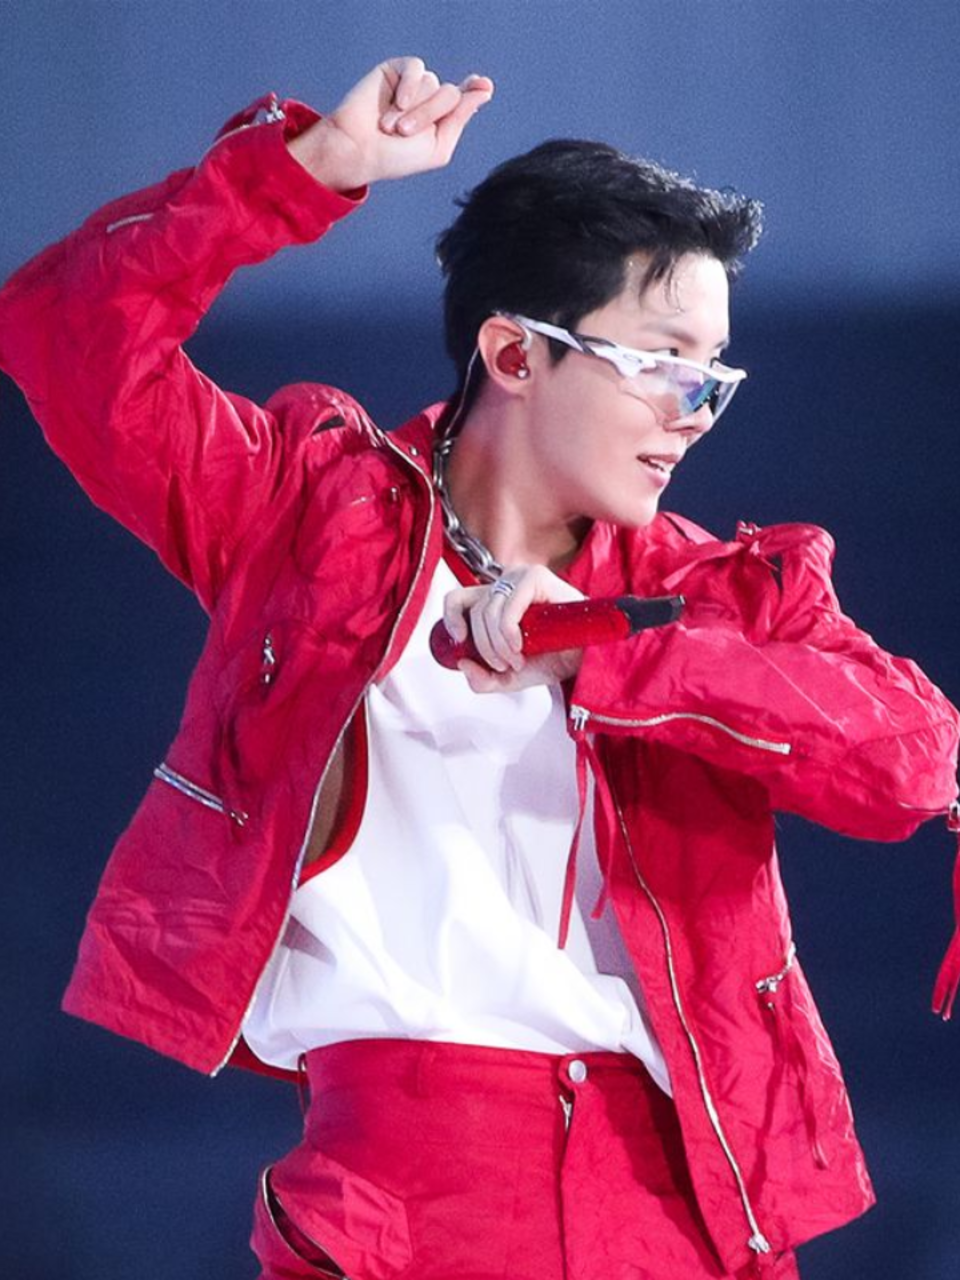 BTS' J-Hope Is The King Of Fiery Stage Fits And Here's Proof